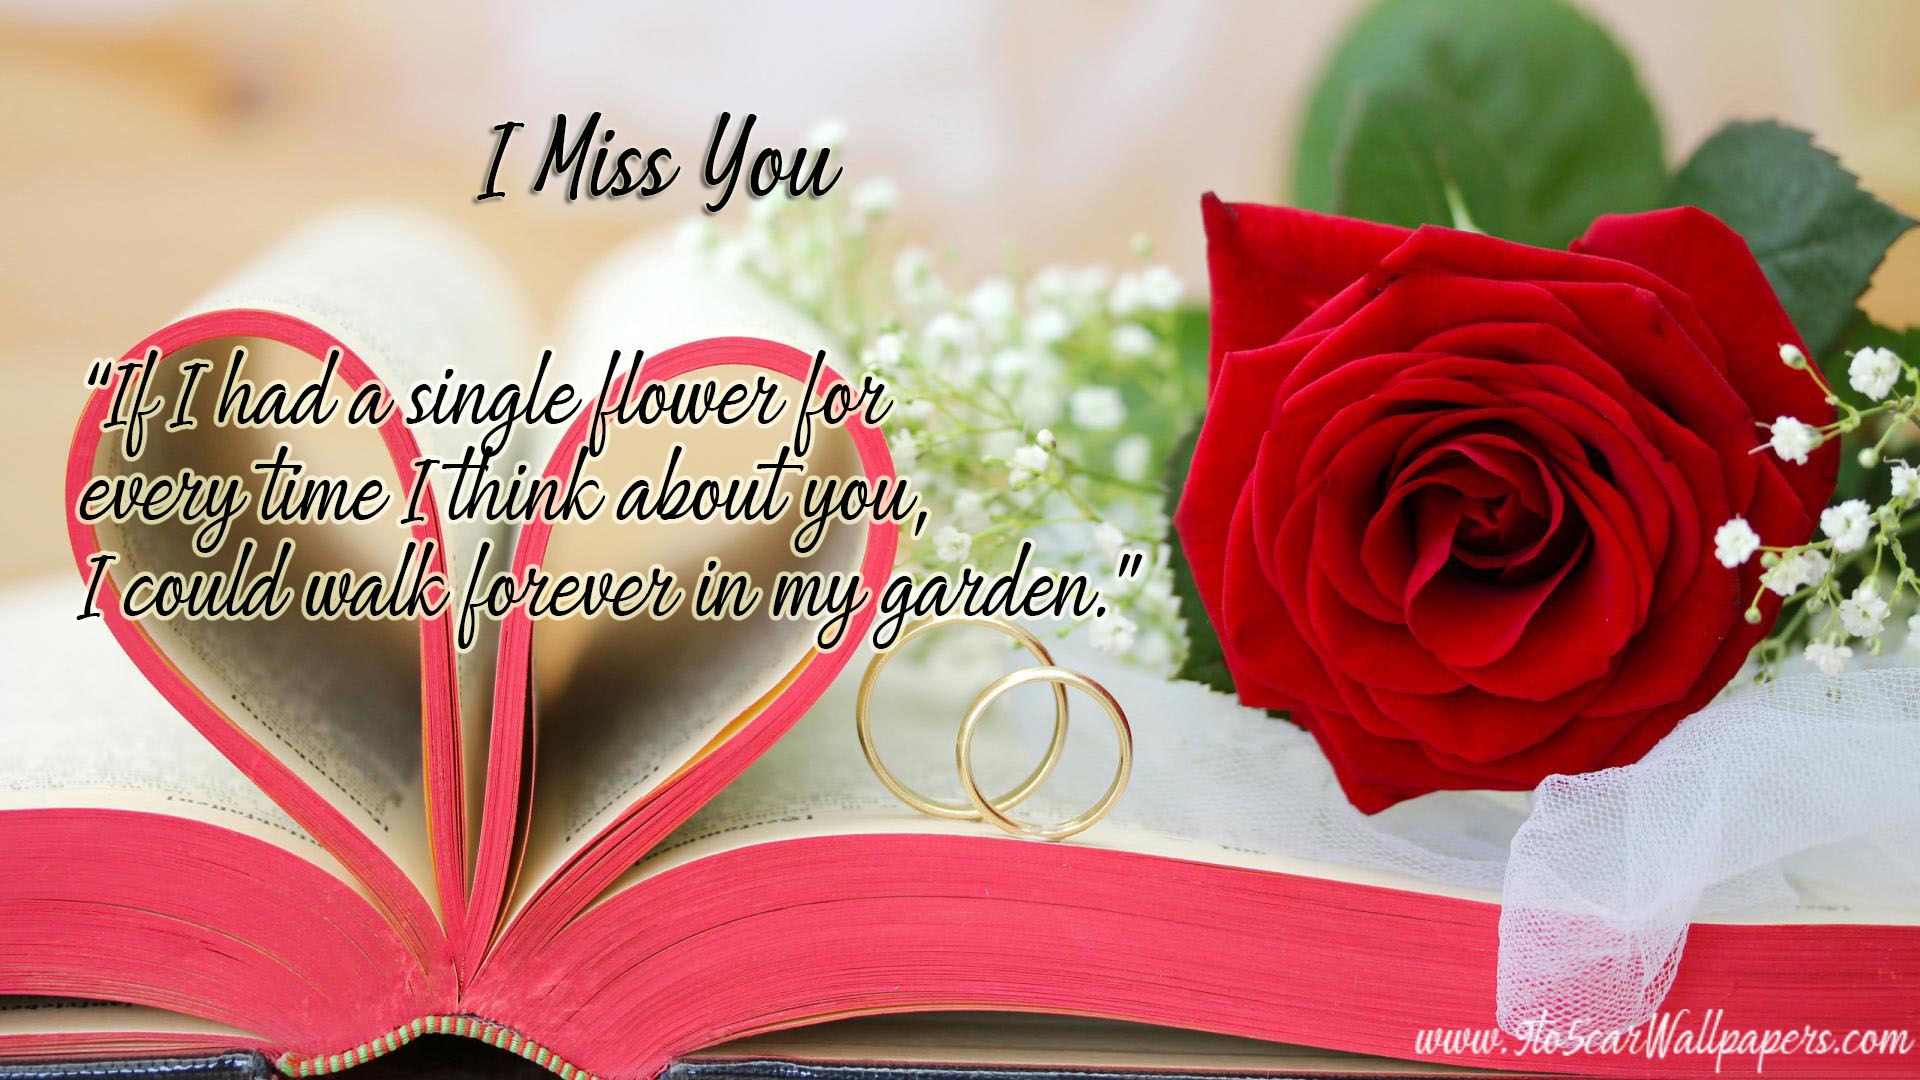 Romantic Miss u Messages & Miss U Images For Whatsapp